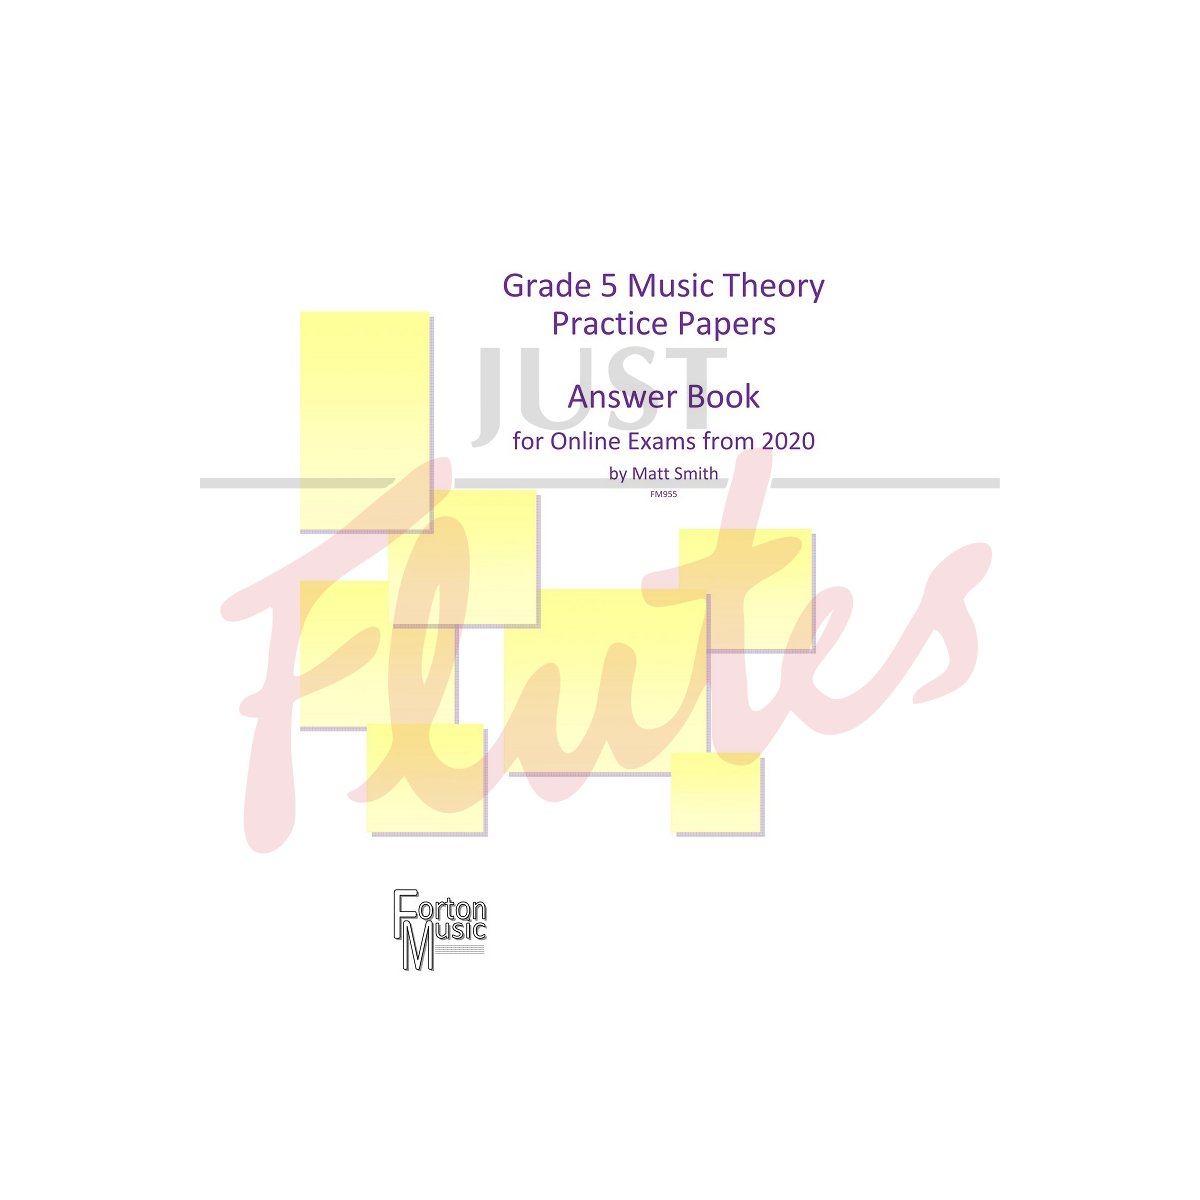 Grade 5 Theory Practice Papers Answer Book